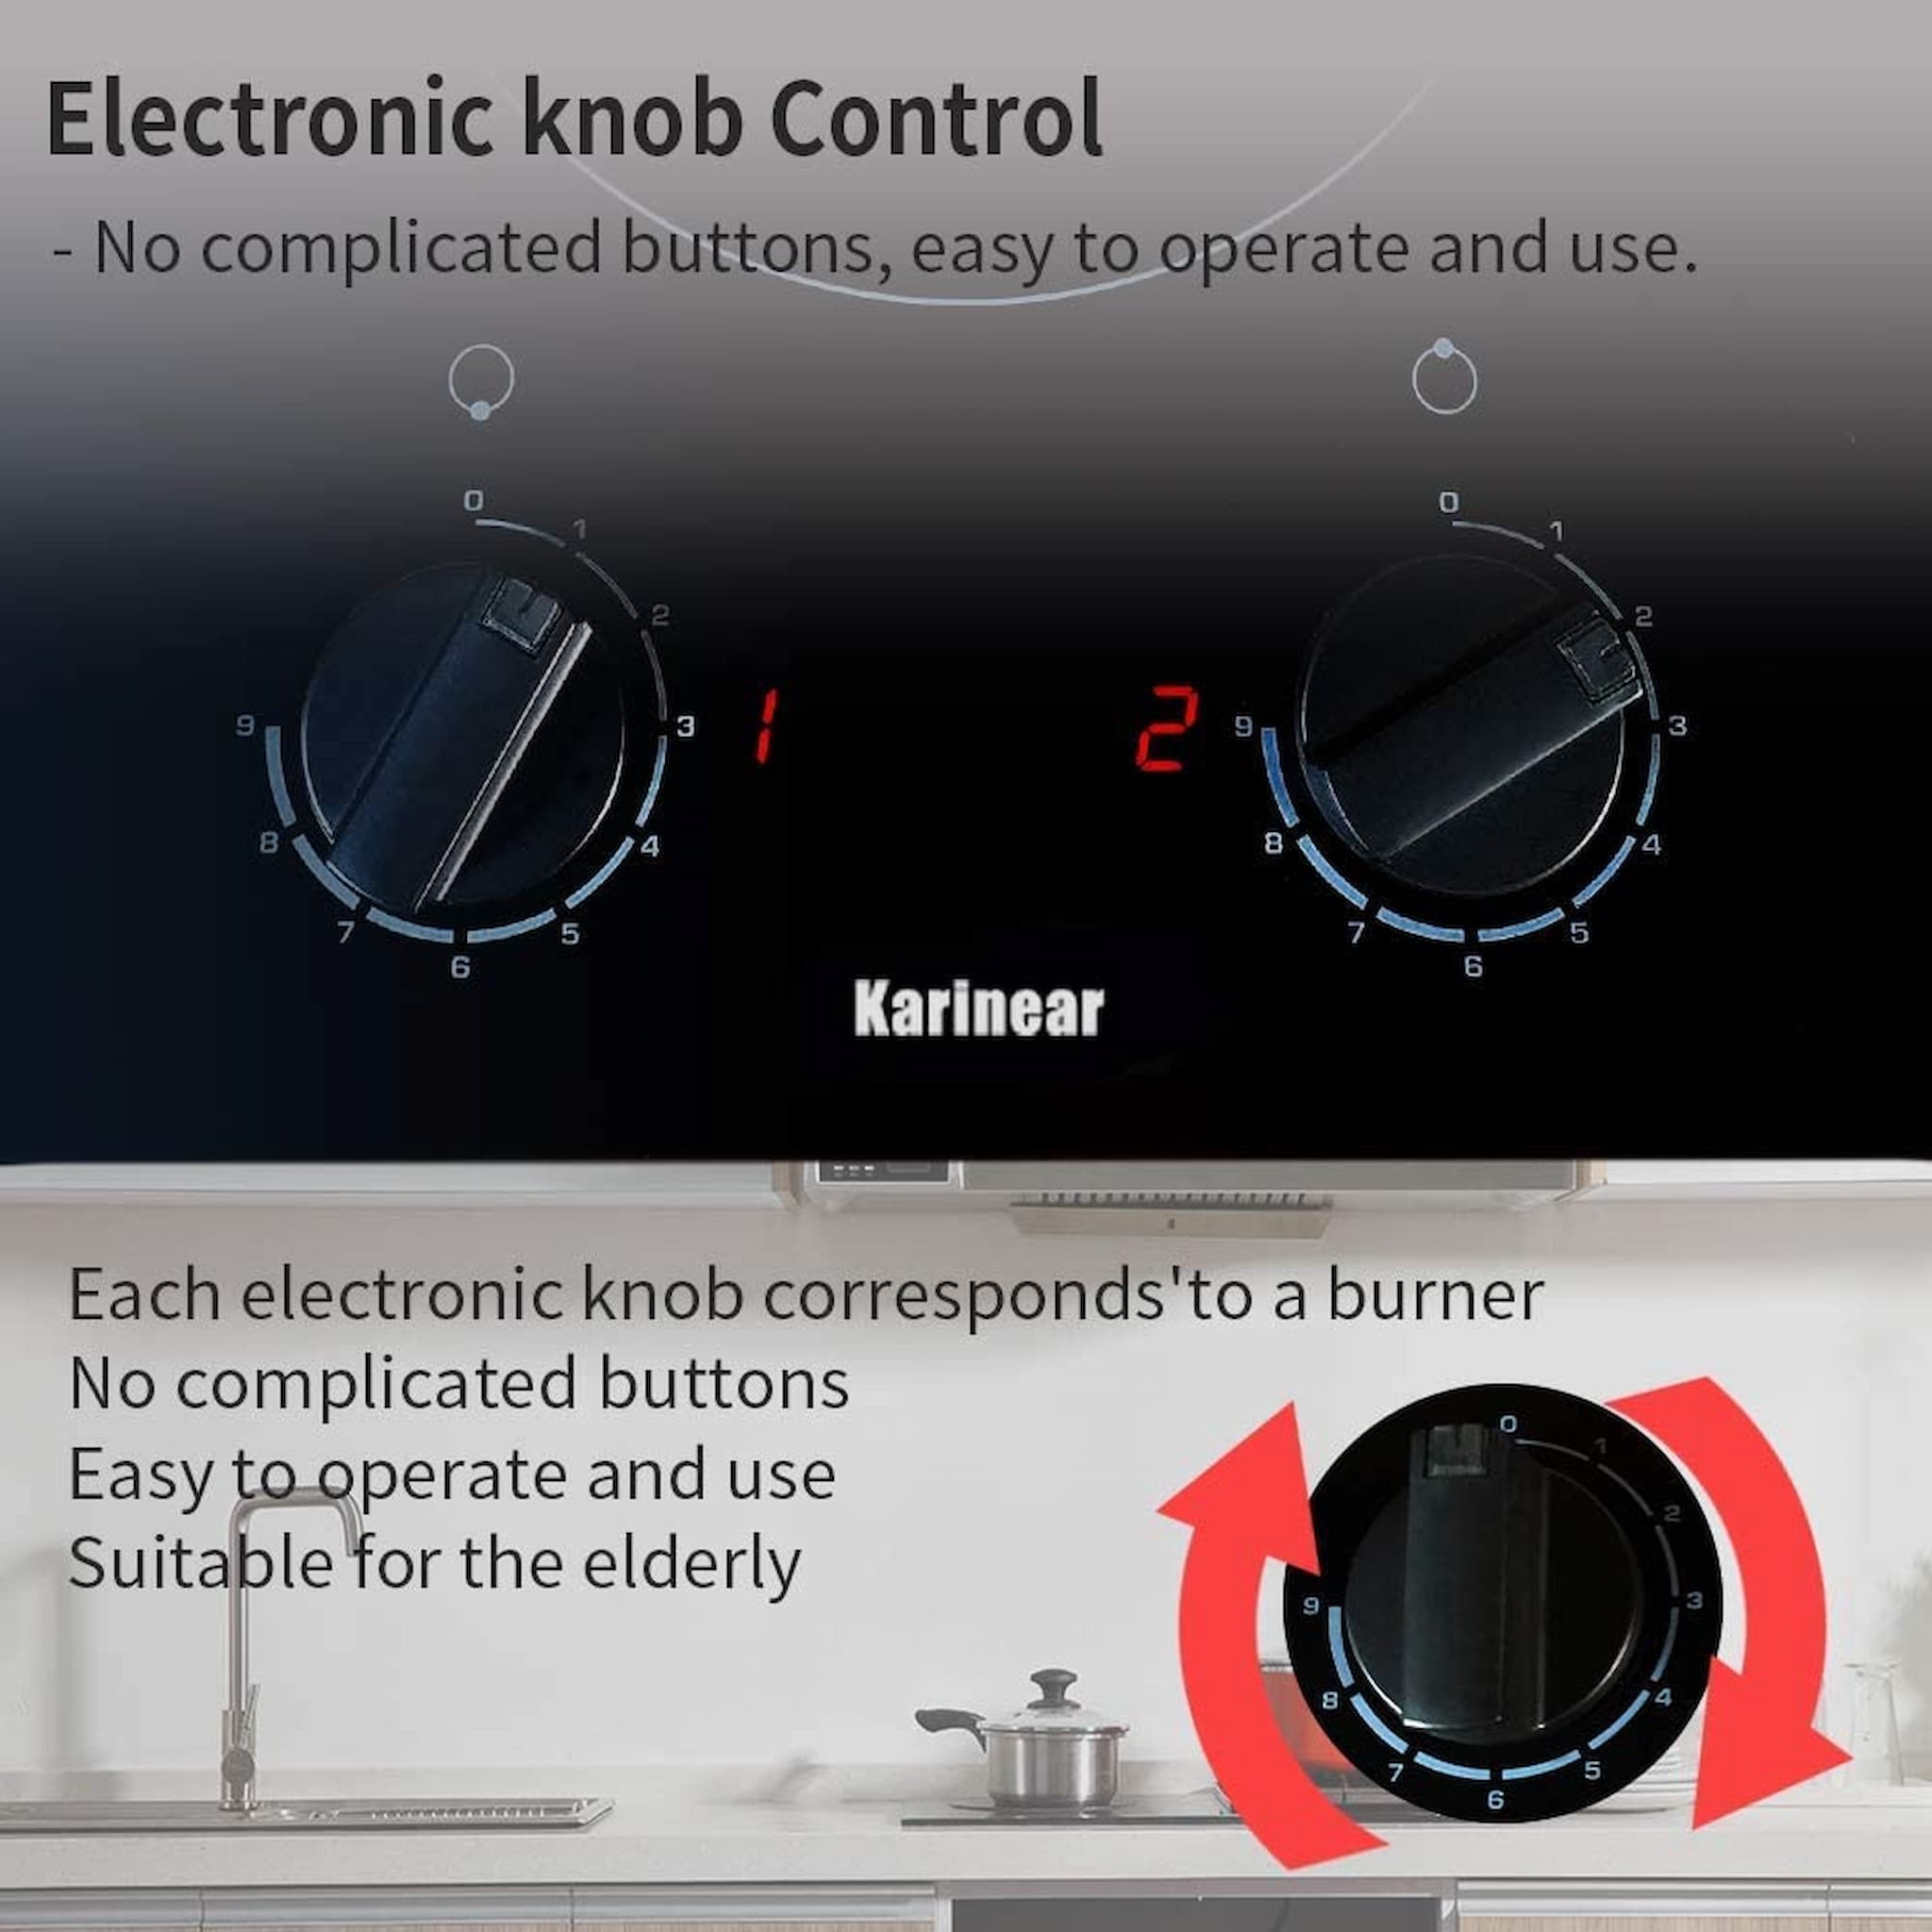 【 Knob Control Ceramic Hob 】No complicated buttons, easy to operate and use. The 12 inch electric cooktop is very suitable for the elderly, suitable for people with poor eyesight, not only it is easy to use, but the feeling of rotating the button by hand is more reliable. With electronic knob, our 12" electric cooktop can prevent children or Family pets, cats from accidentally touching the switch button, which is safer than touch screen button.